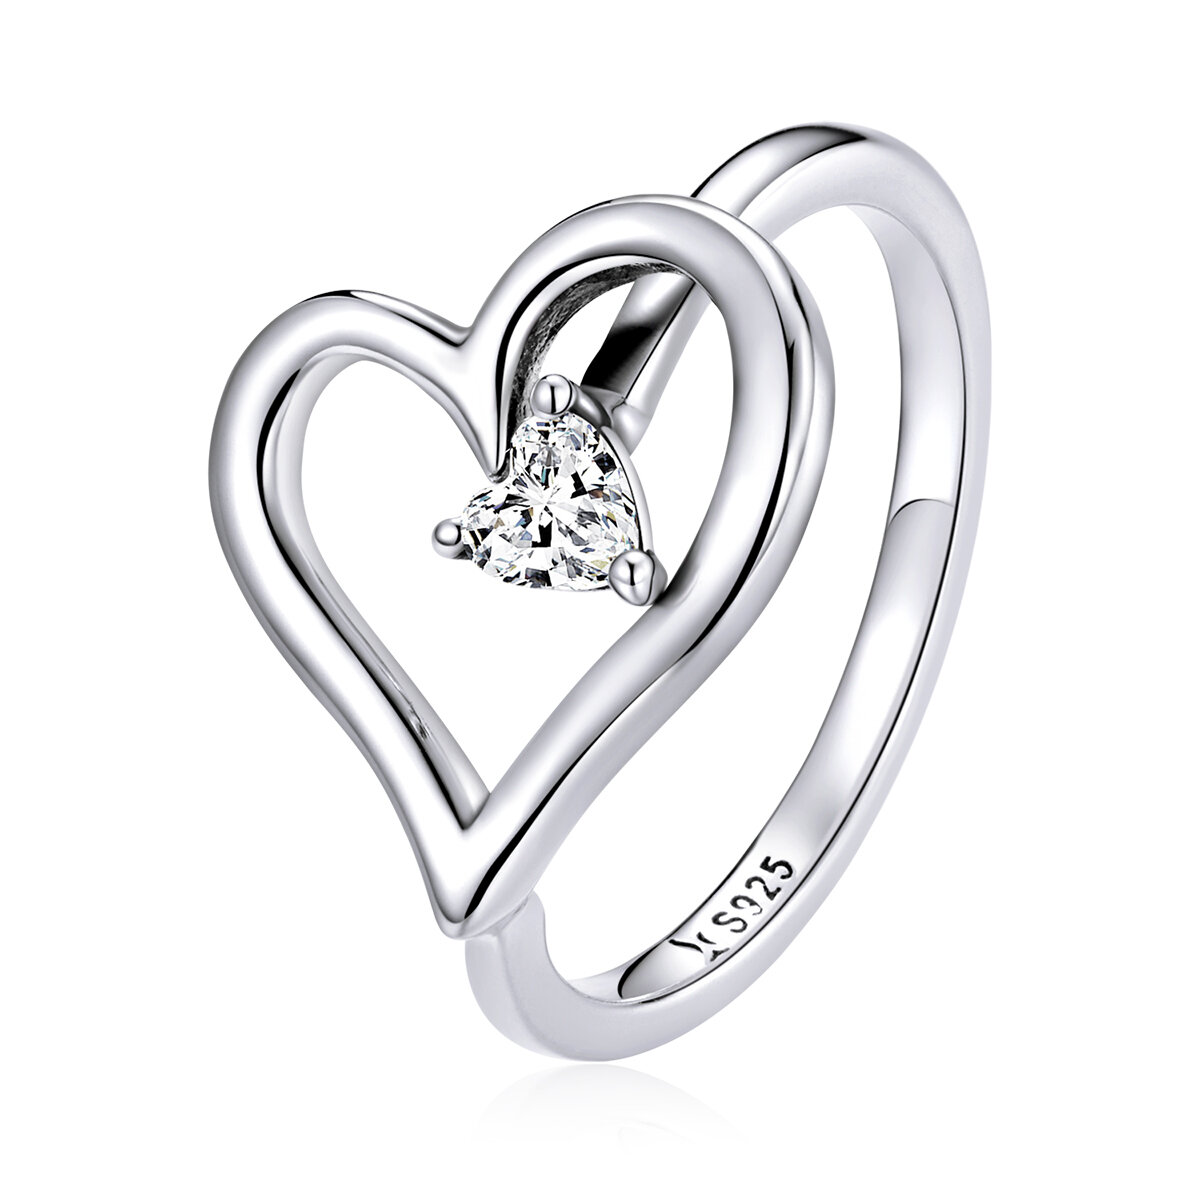 Shiny wish S925 Sterling Silver ring